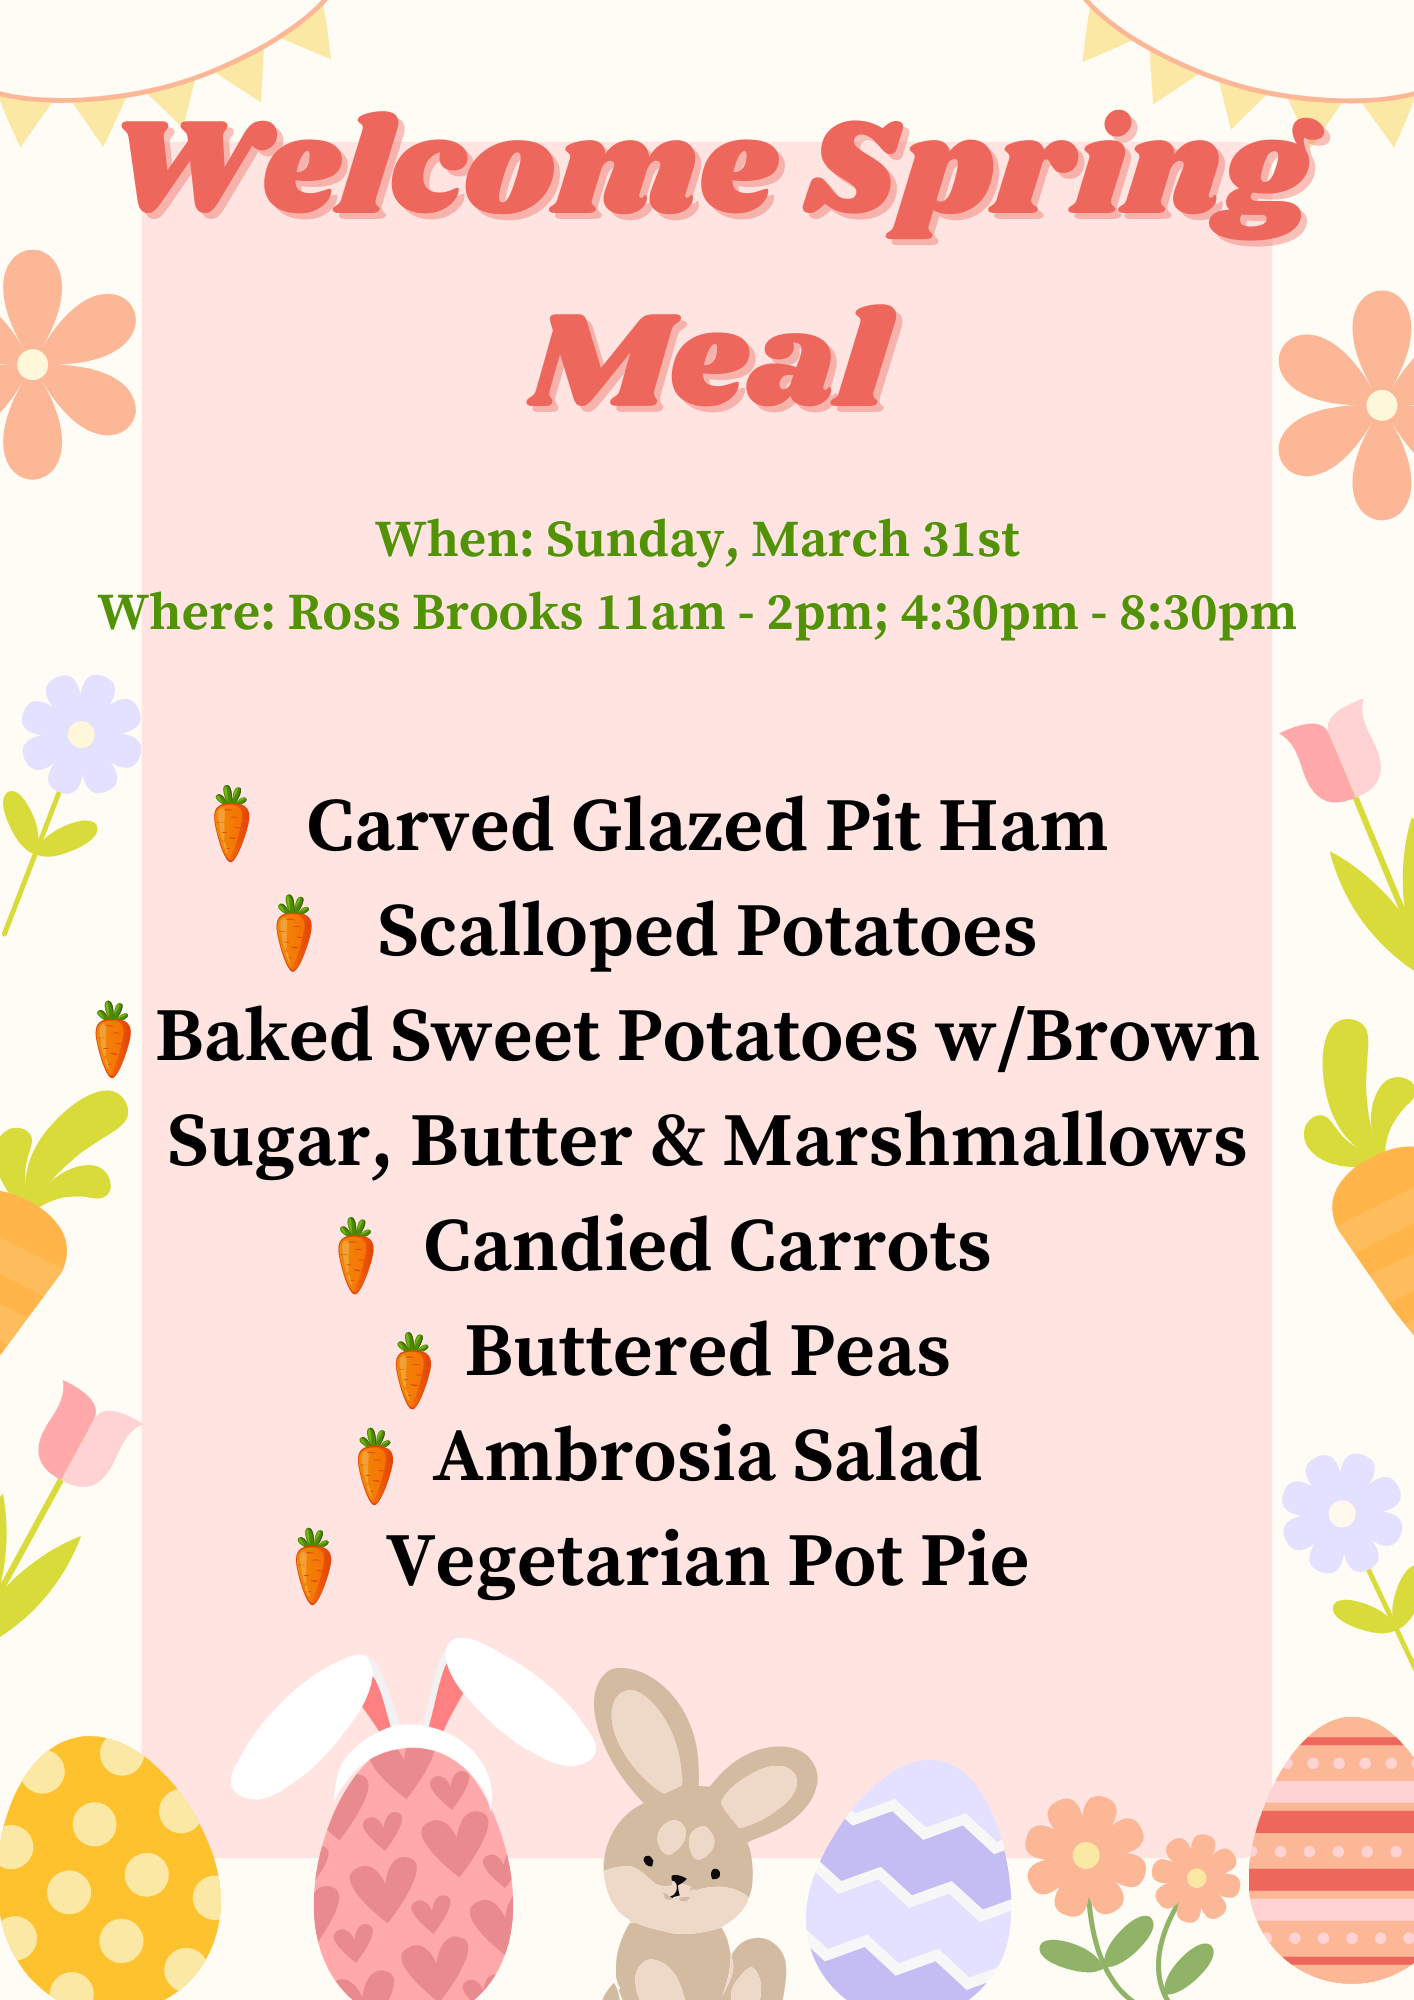 Spring themed flyer with flowers, easter eggs and carrots with information about the Welcome Spring Meal Welcome Spring Meal When: Sunday, March 31st Where: Ross Brooks 11am - 2pm; 4:30pm - 8:30pm Carved Glazed Pit Ham Scalloped Potatoes Baked Sweet Potatoes w/Brown Sugar, Butter & Marshmallows Candied Carrots Buttered Peas Ambrosia Salad Vegetarian Pot Pie